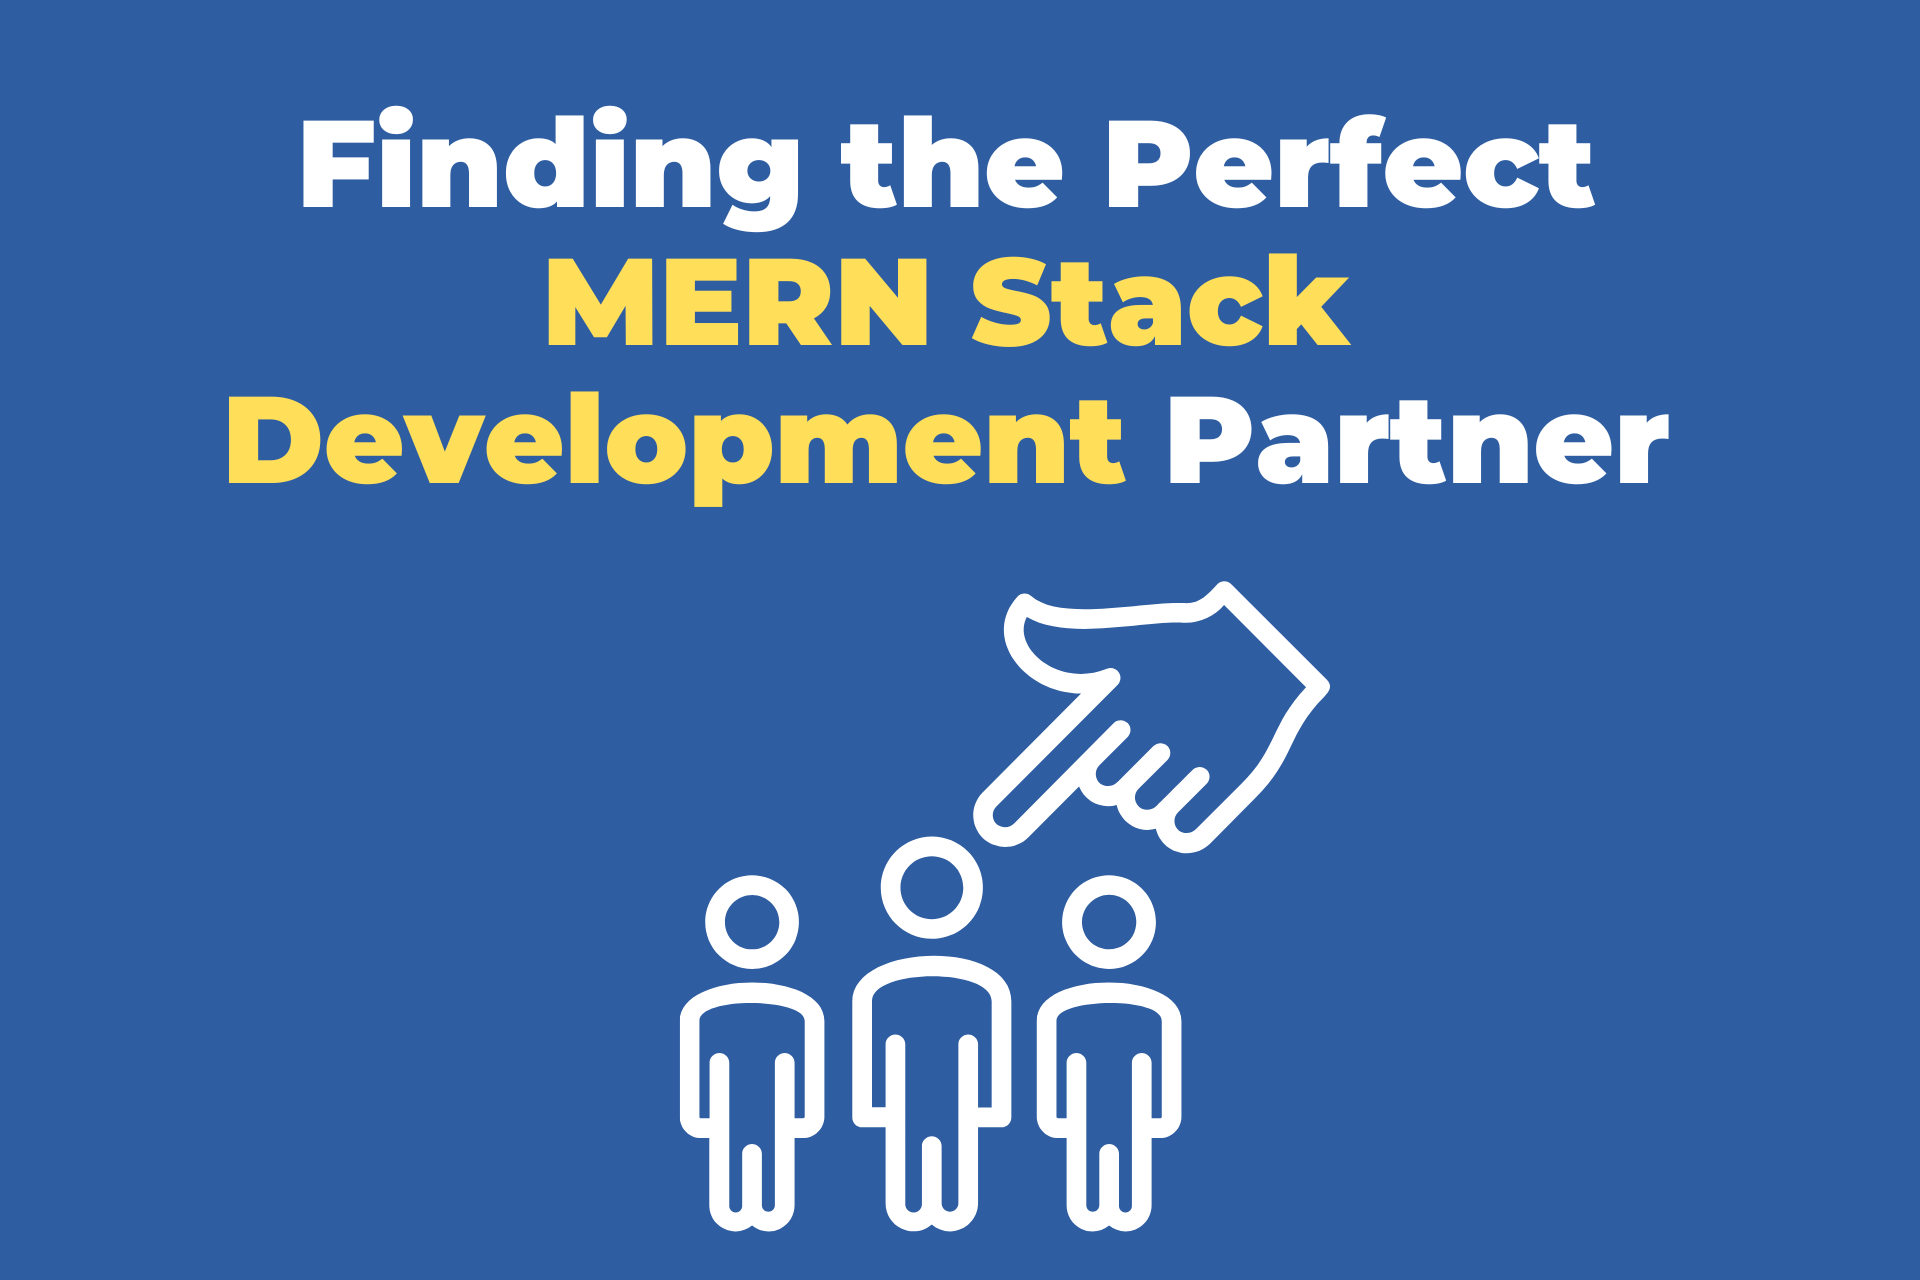 Finding the Perfect MERN Stack Development Partner